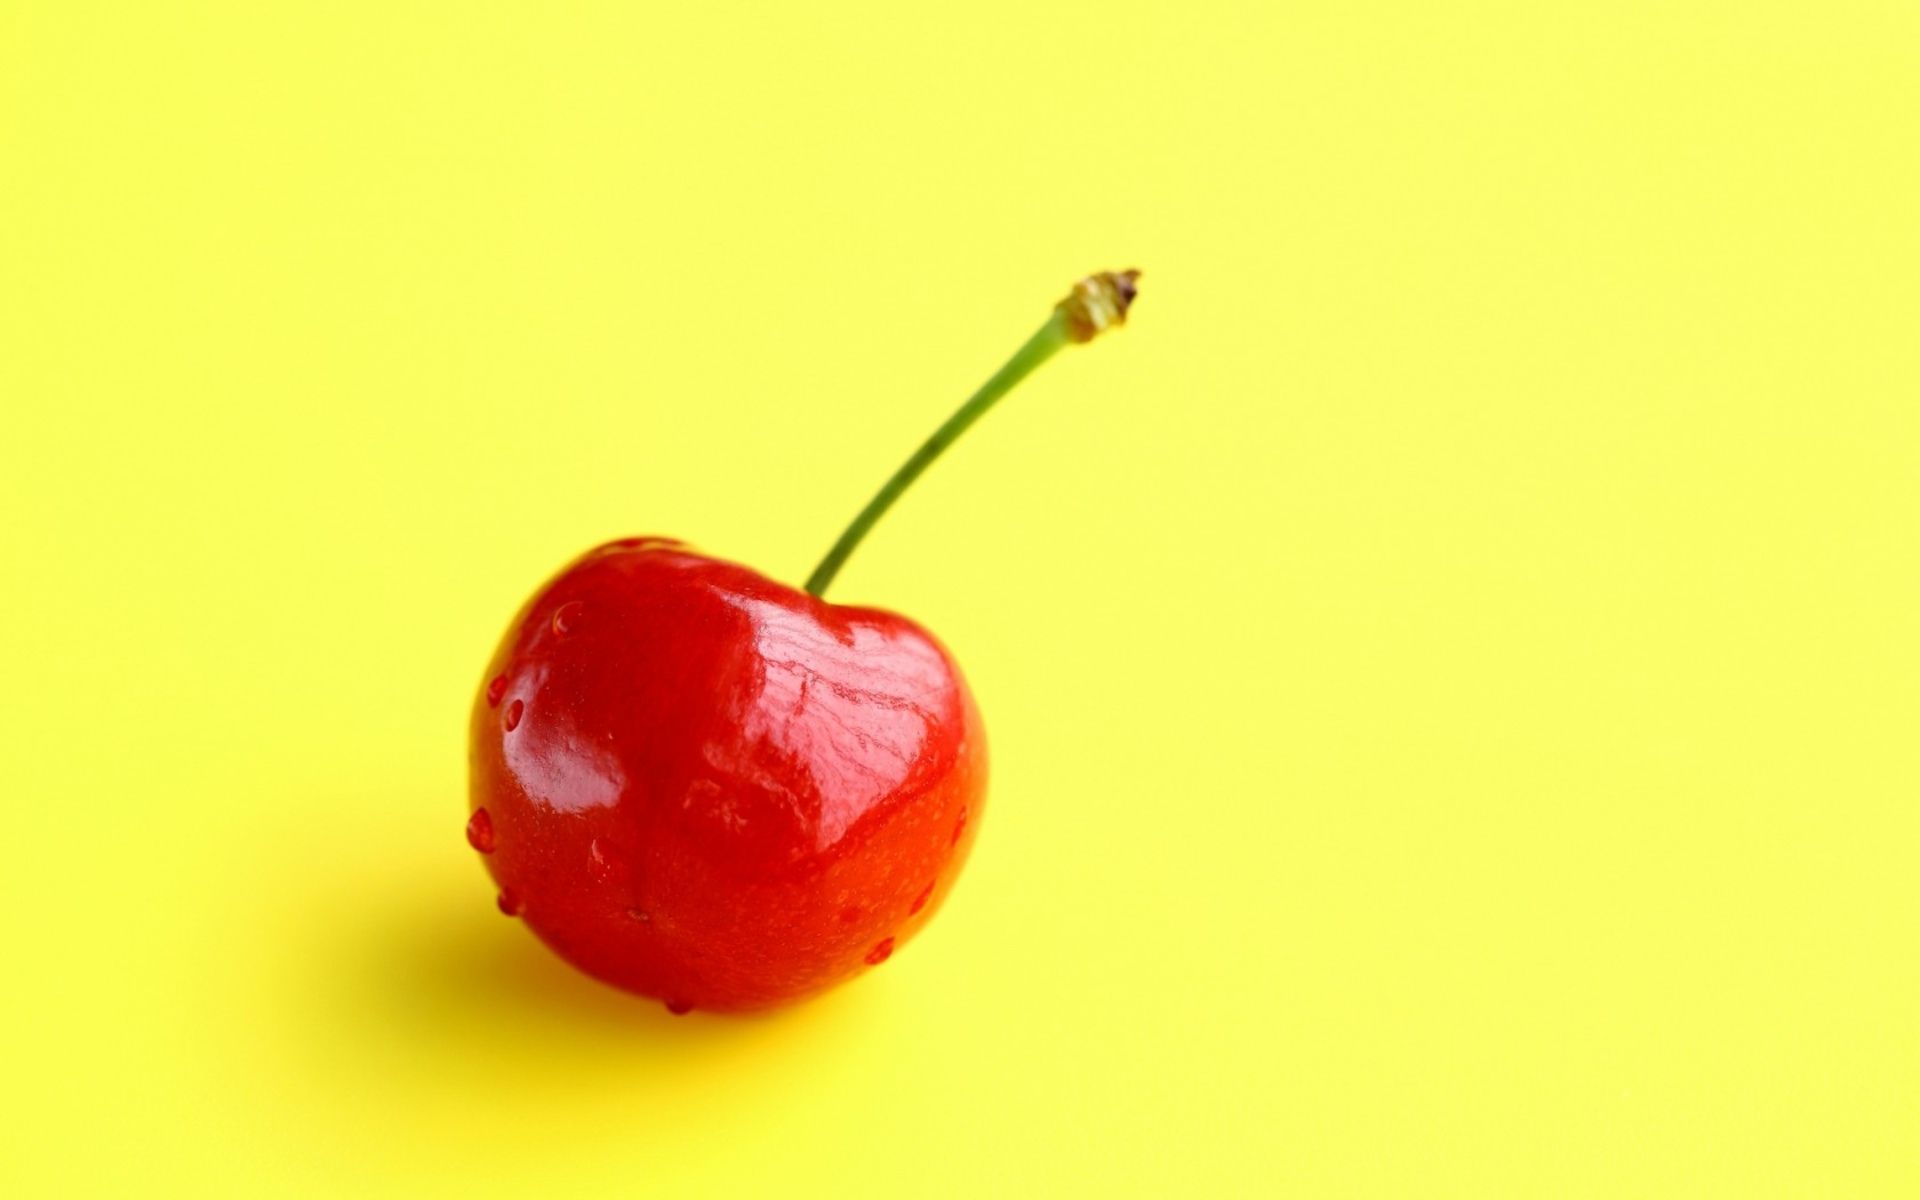 Excellent Cherry Wallpaper Full HD Pictures